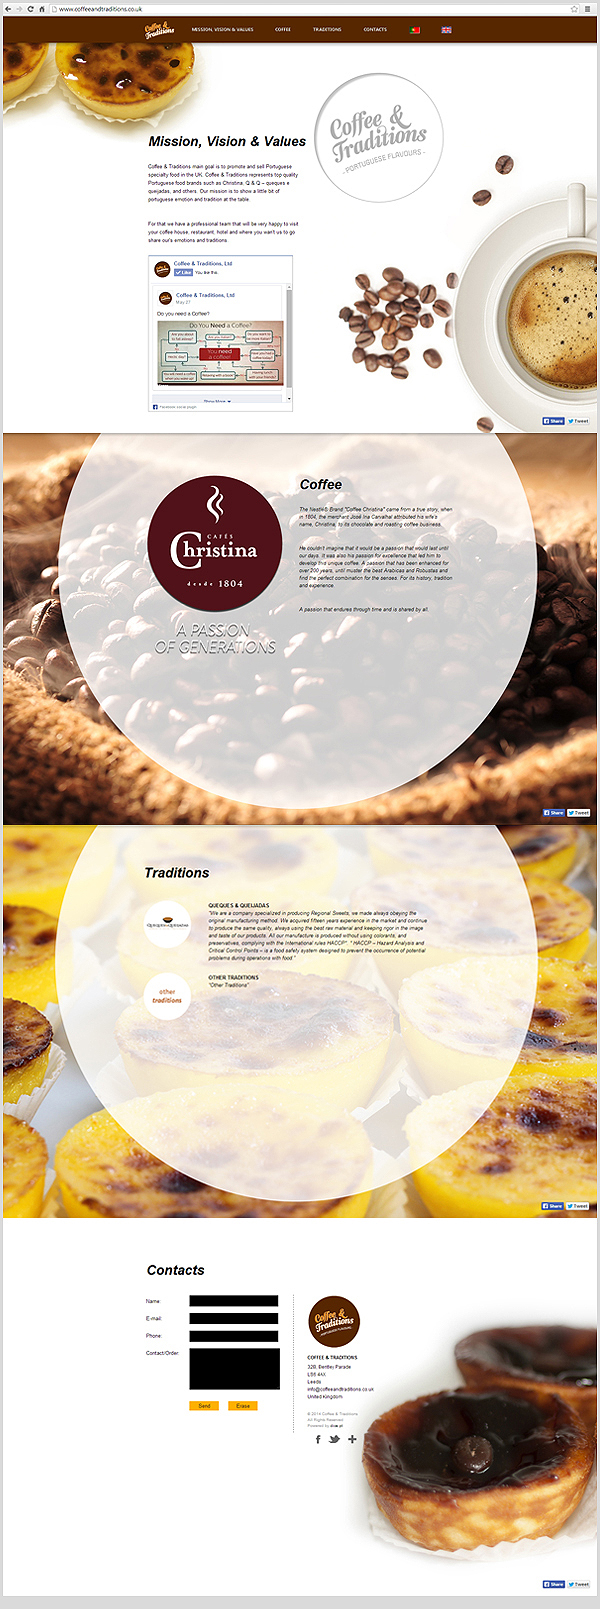 bakery cake Coffee Portugal Flavours tradition brand logo concept